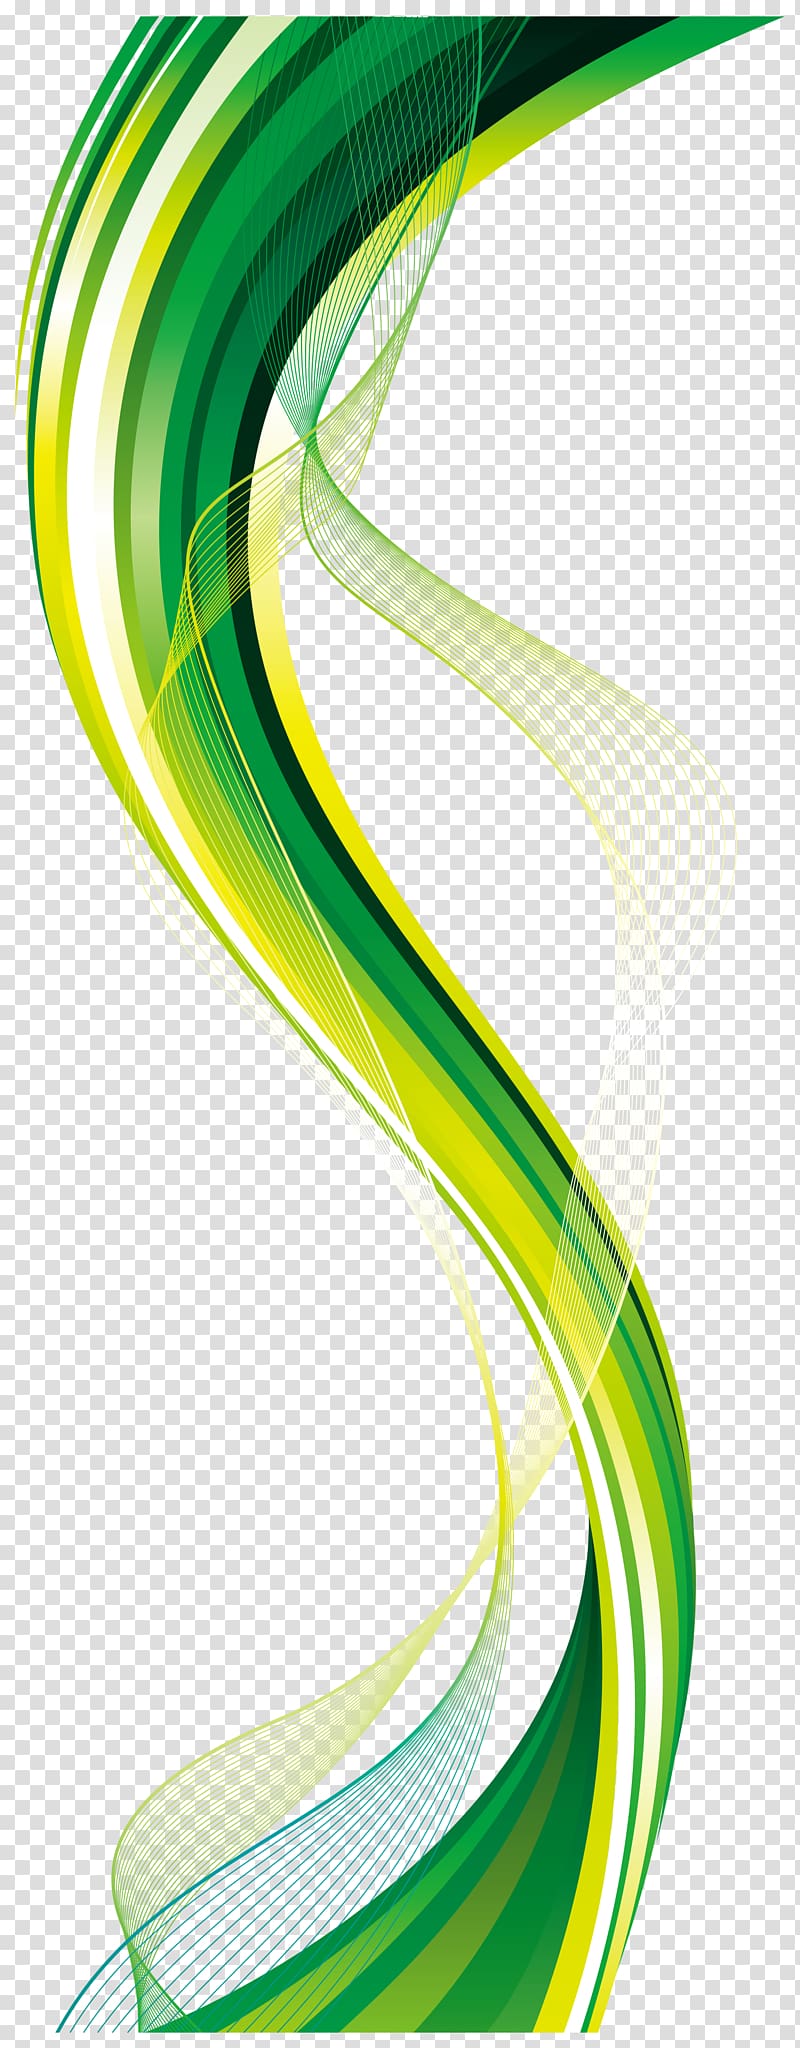 Green Euclidean , Grass Green Colorful Silk Background , green and white swirling pattern illustration transparent background PNG clipart